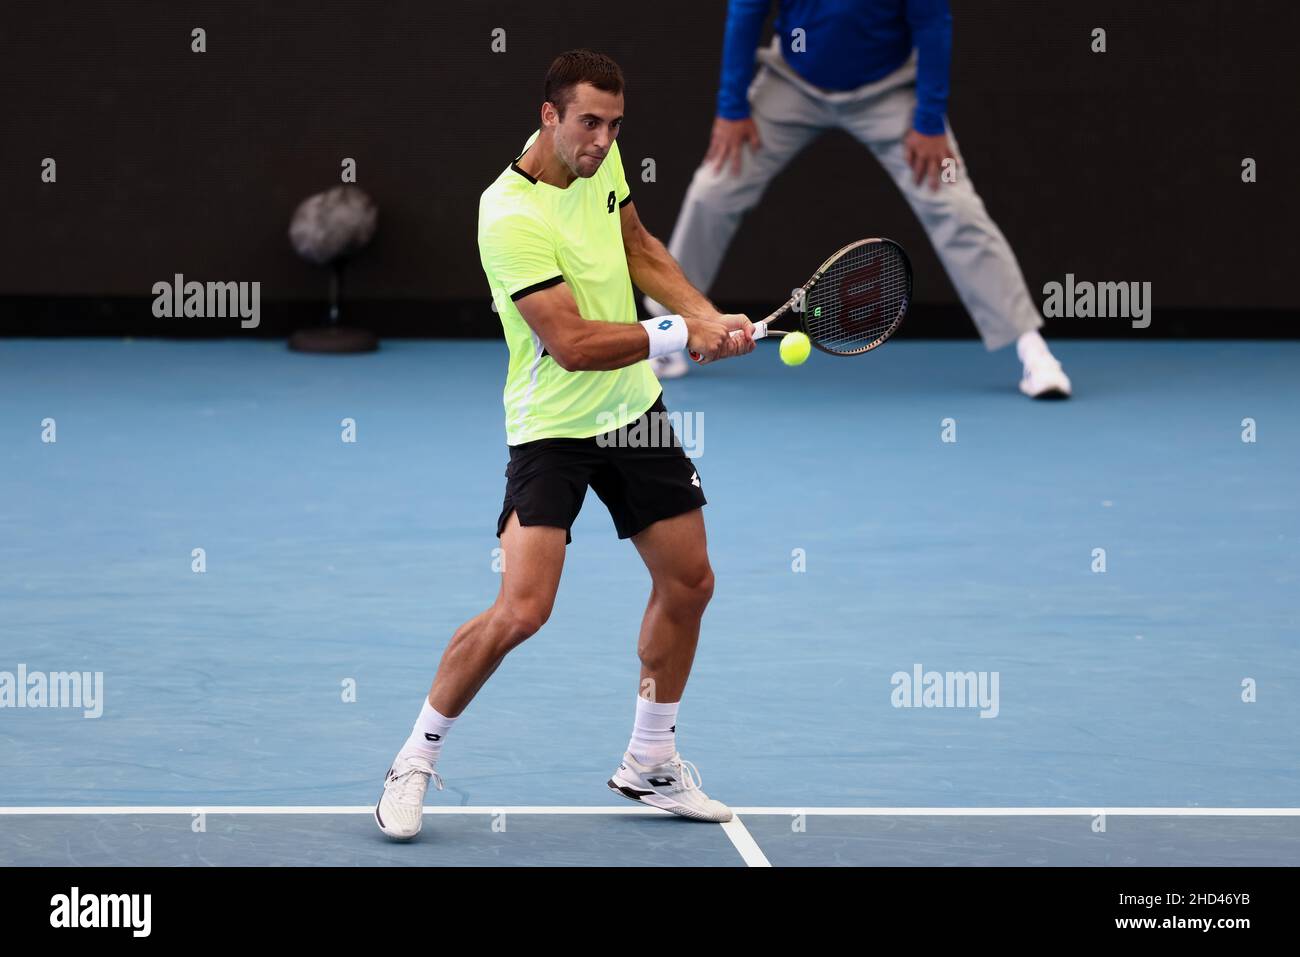 Adelaide, Australia, 3 January, 2022. Laslo Djere of Serbia plays a  forehand during the ATP singles match between Laslo Djere of Serbia and  Roberto Carballes Baena of Spain on day one of